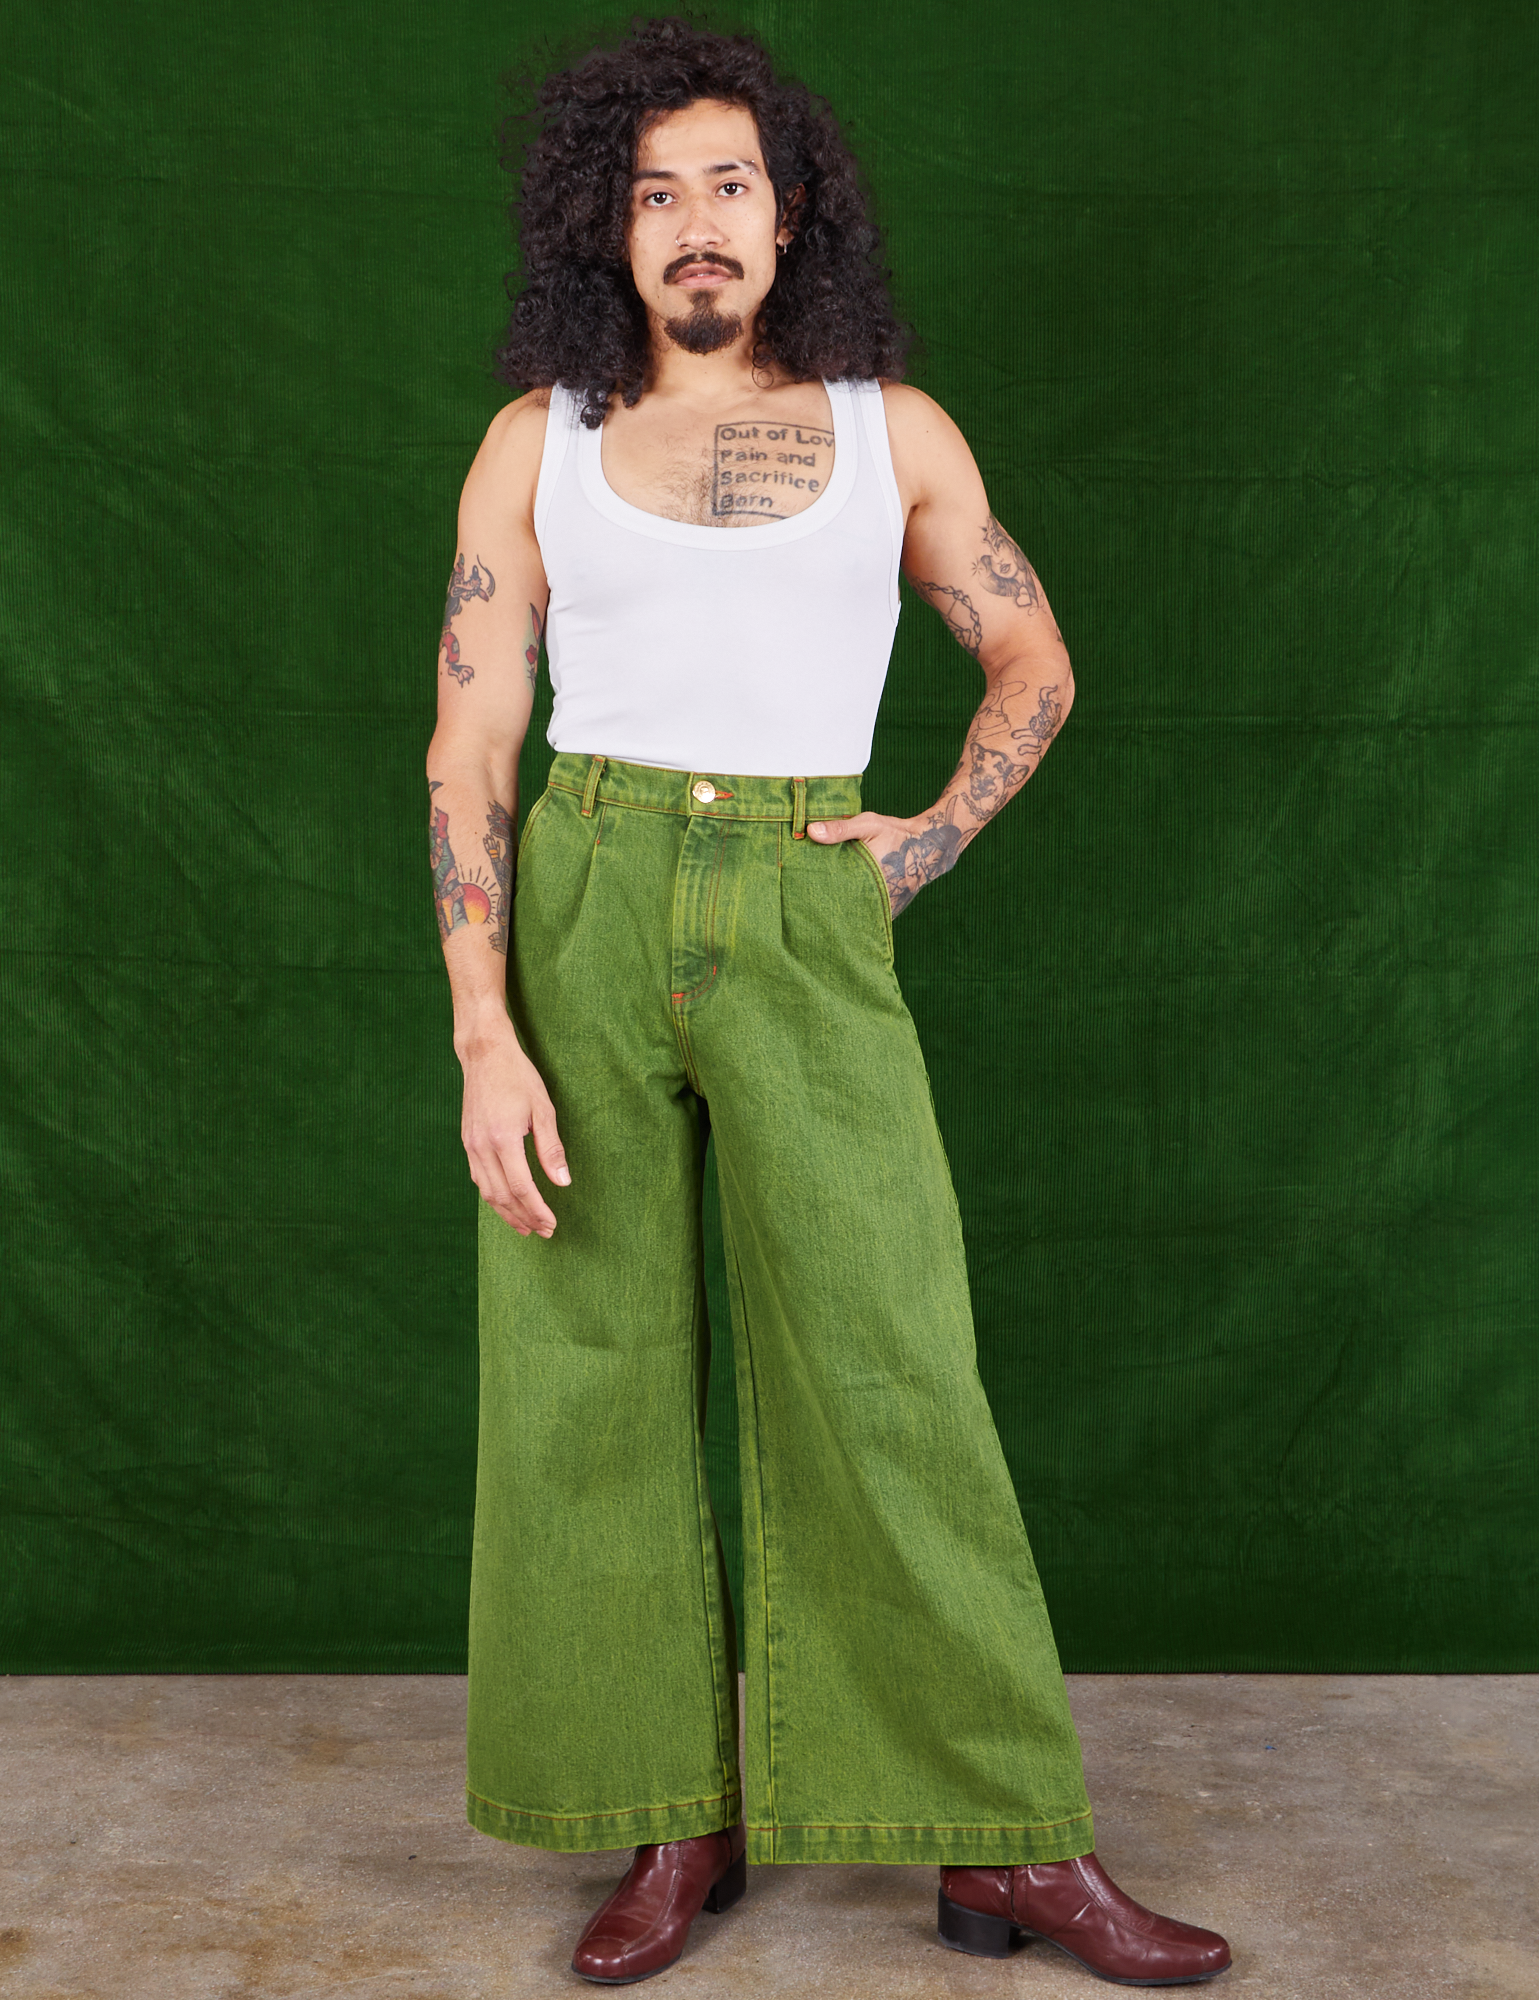 Jesse is 5'8" and wearing XXS Overdyed Wide Leg Trousers in Gross Green paired with vintage off-white Cropped Tank Top